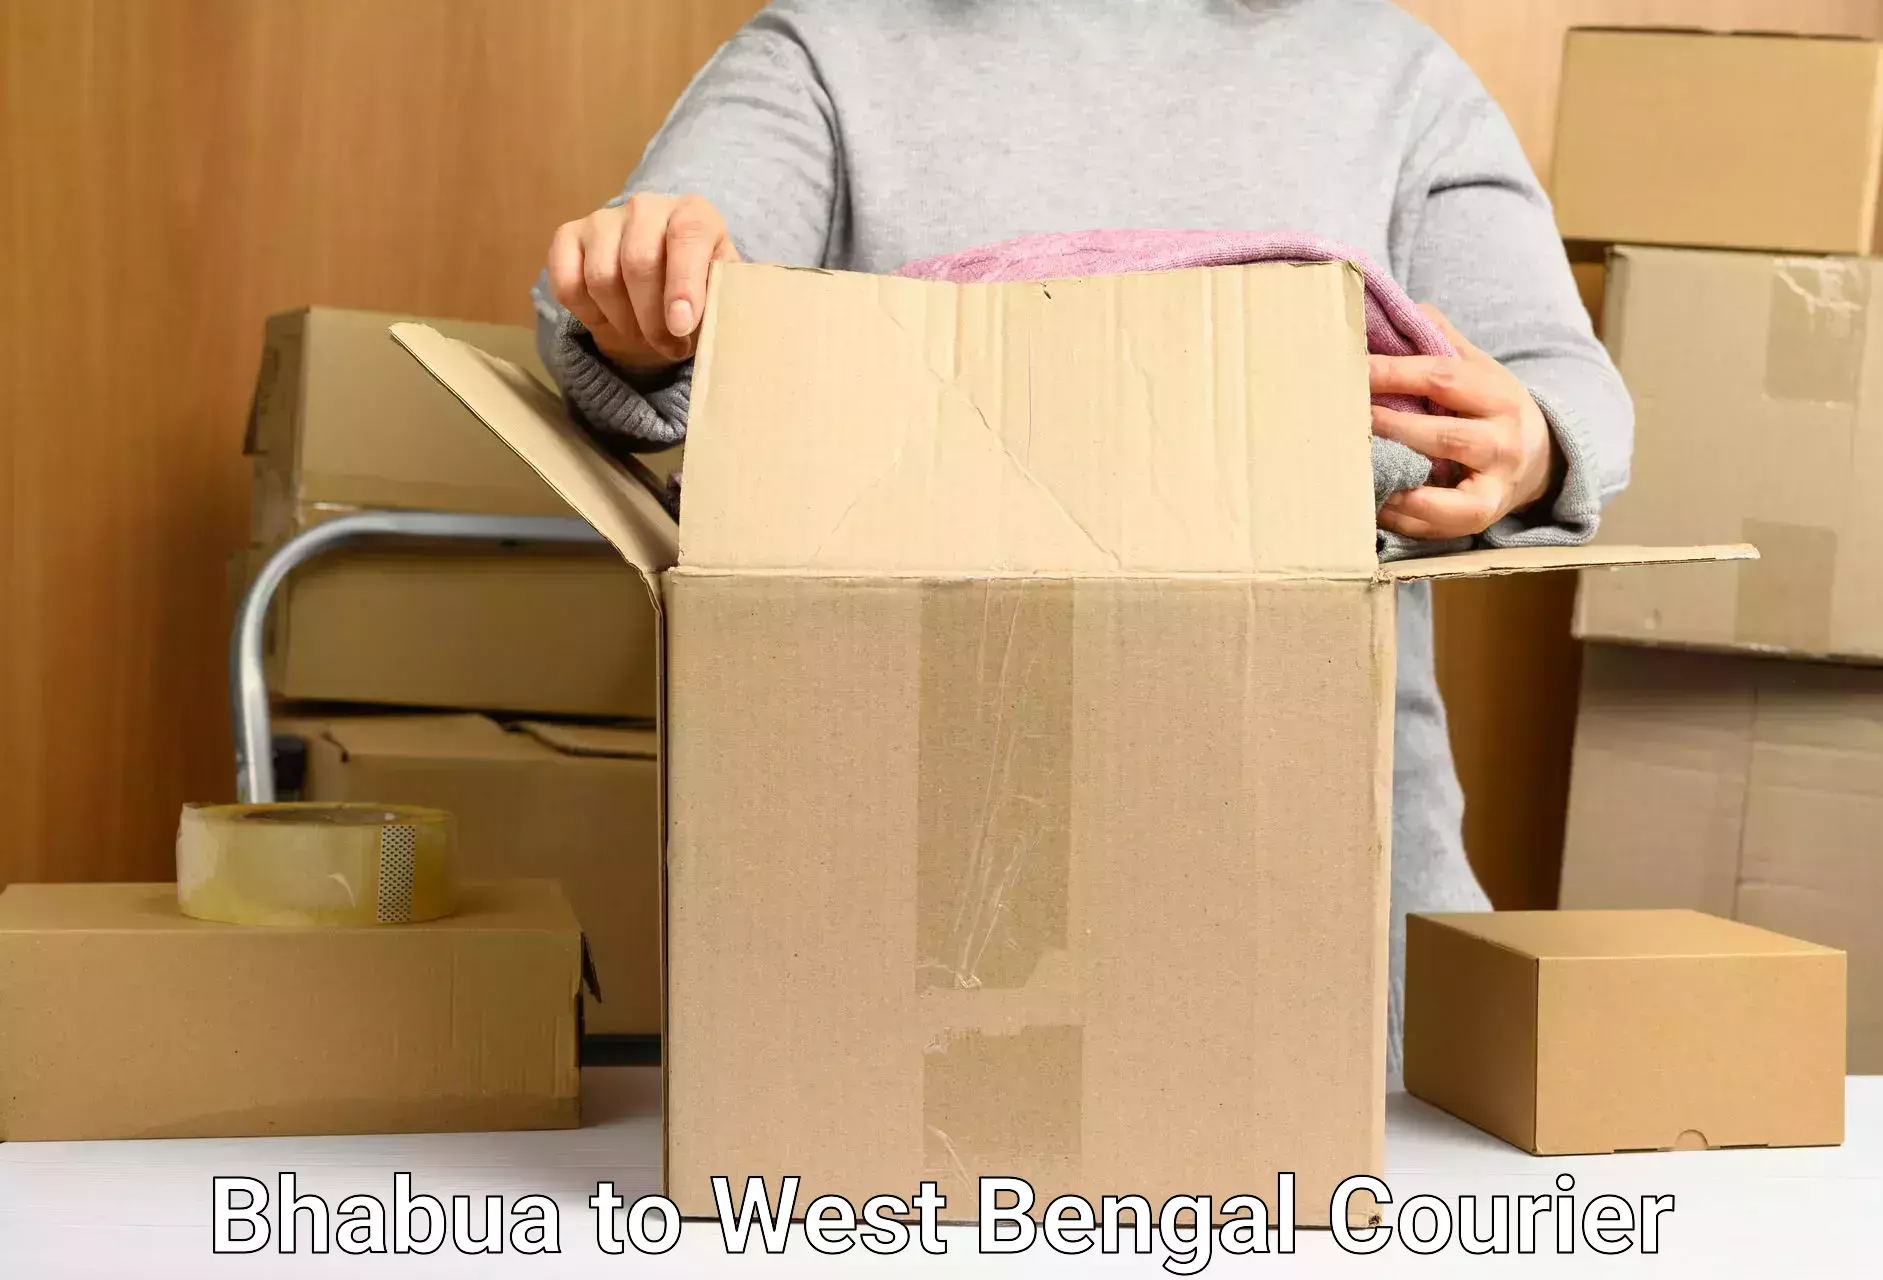 Residential courier service in Bhabua to Kanchrapara